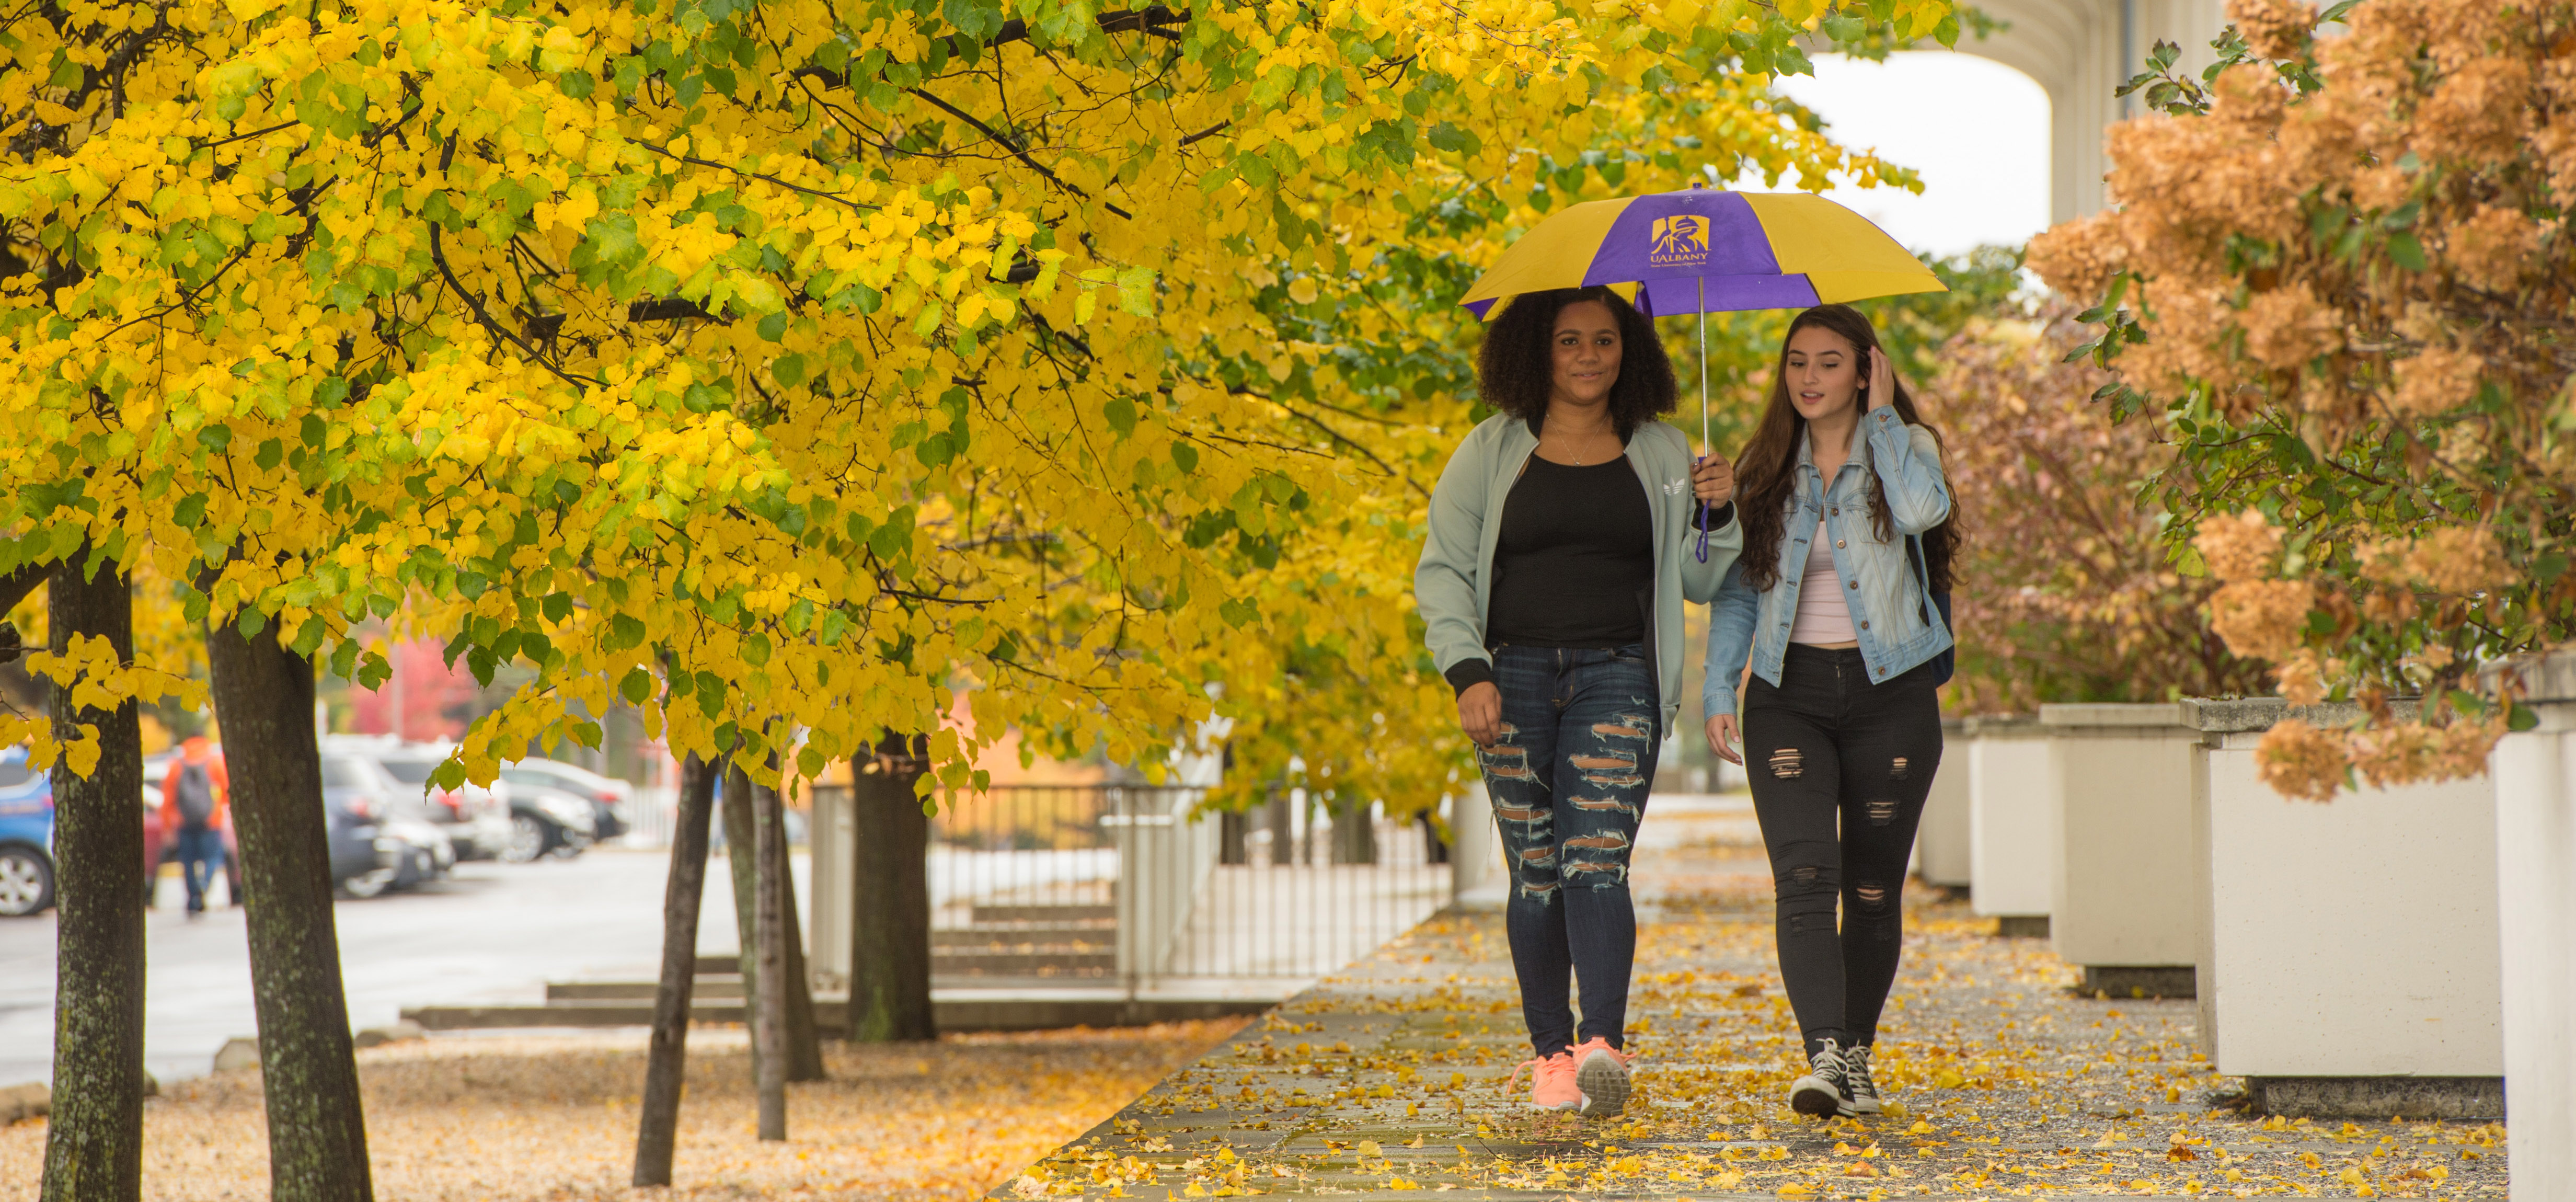 Two students walk across campus under a UAlbany umbrella and falling yellow leaves